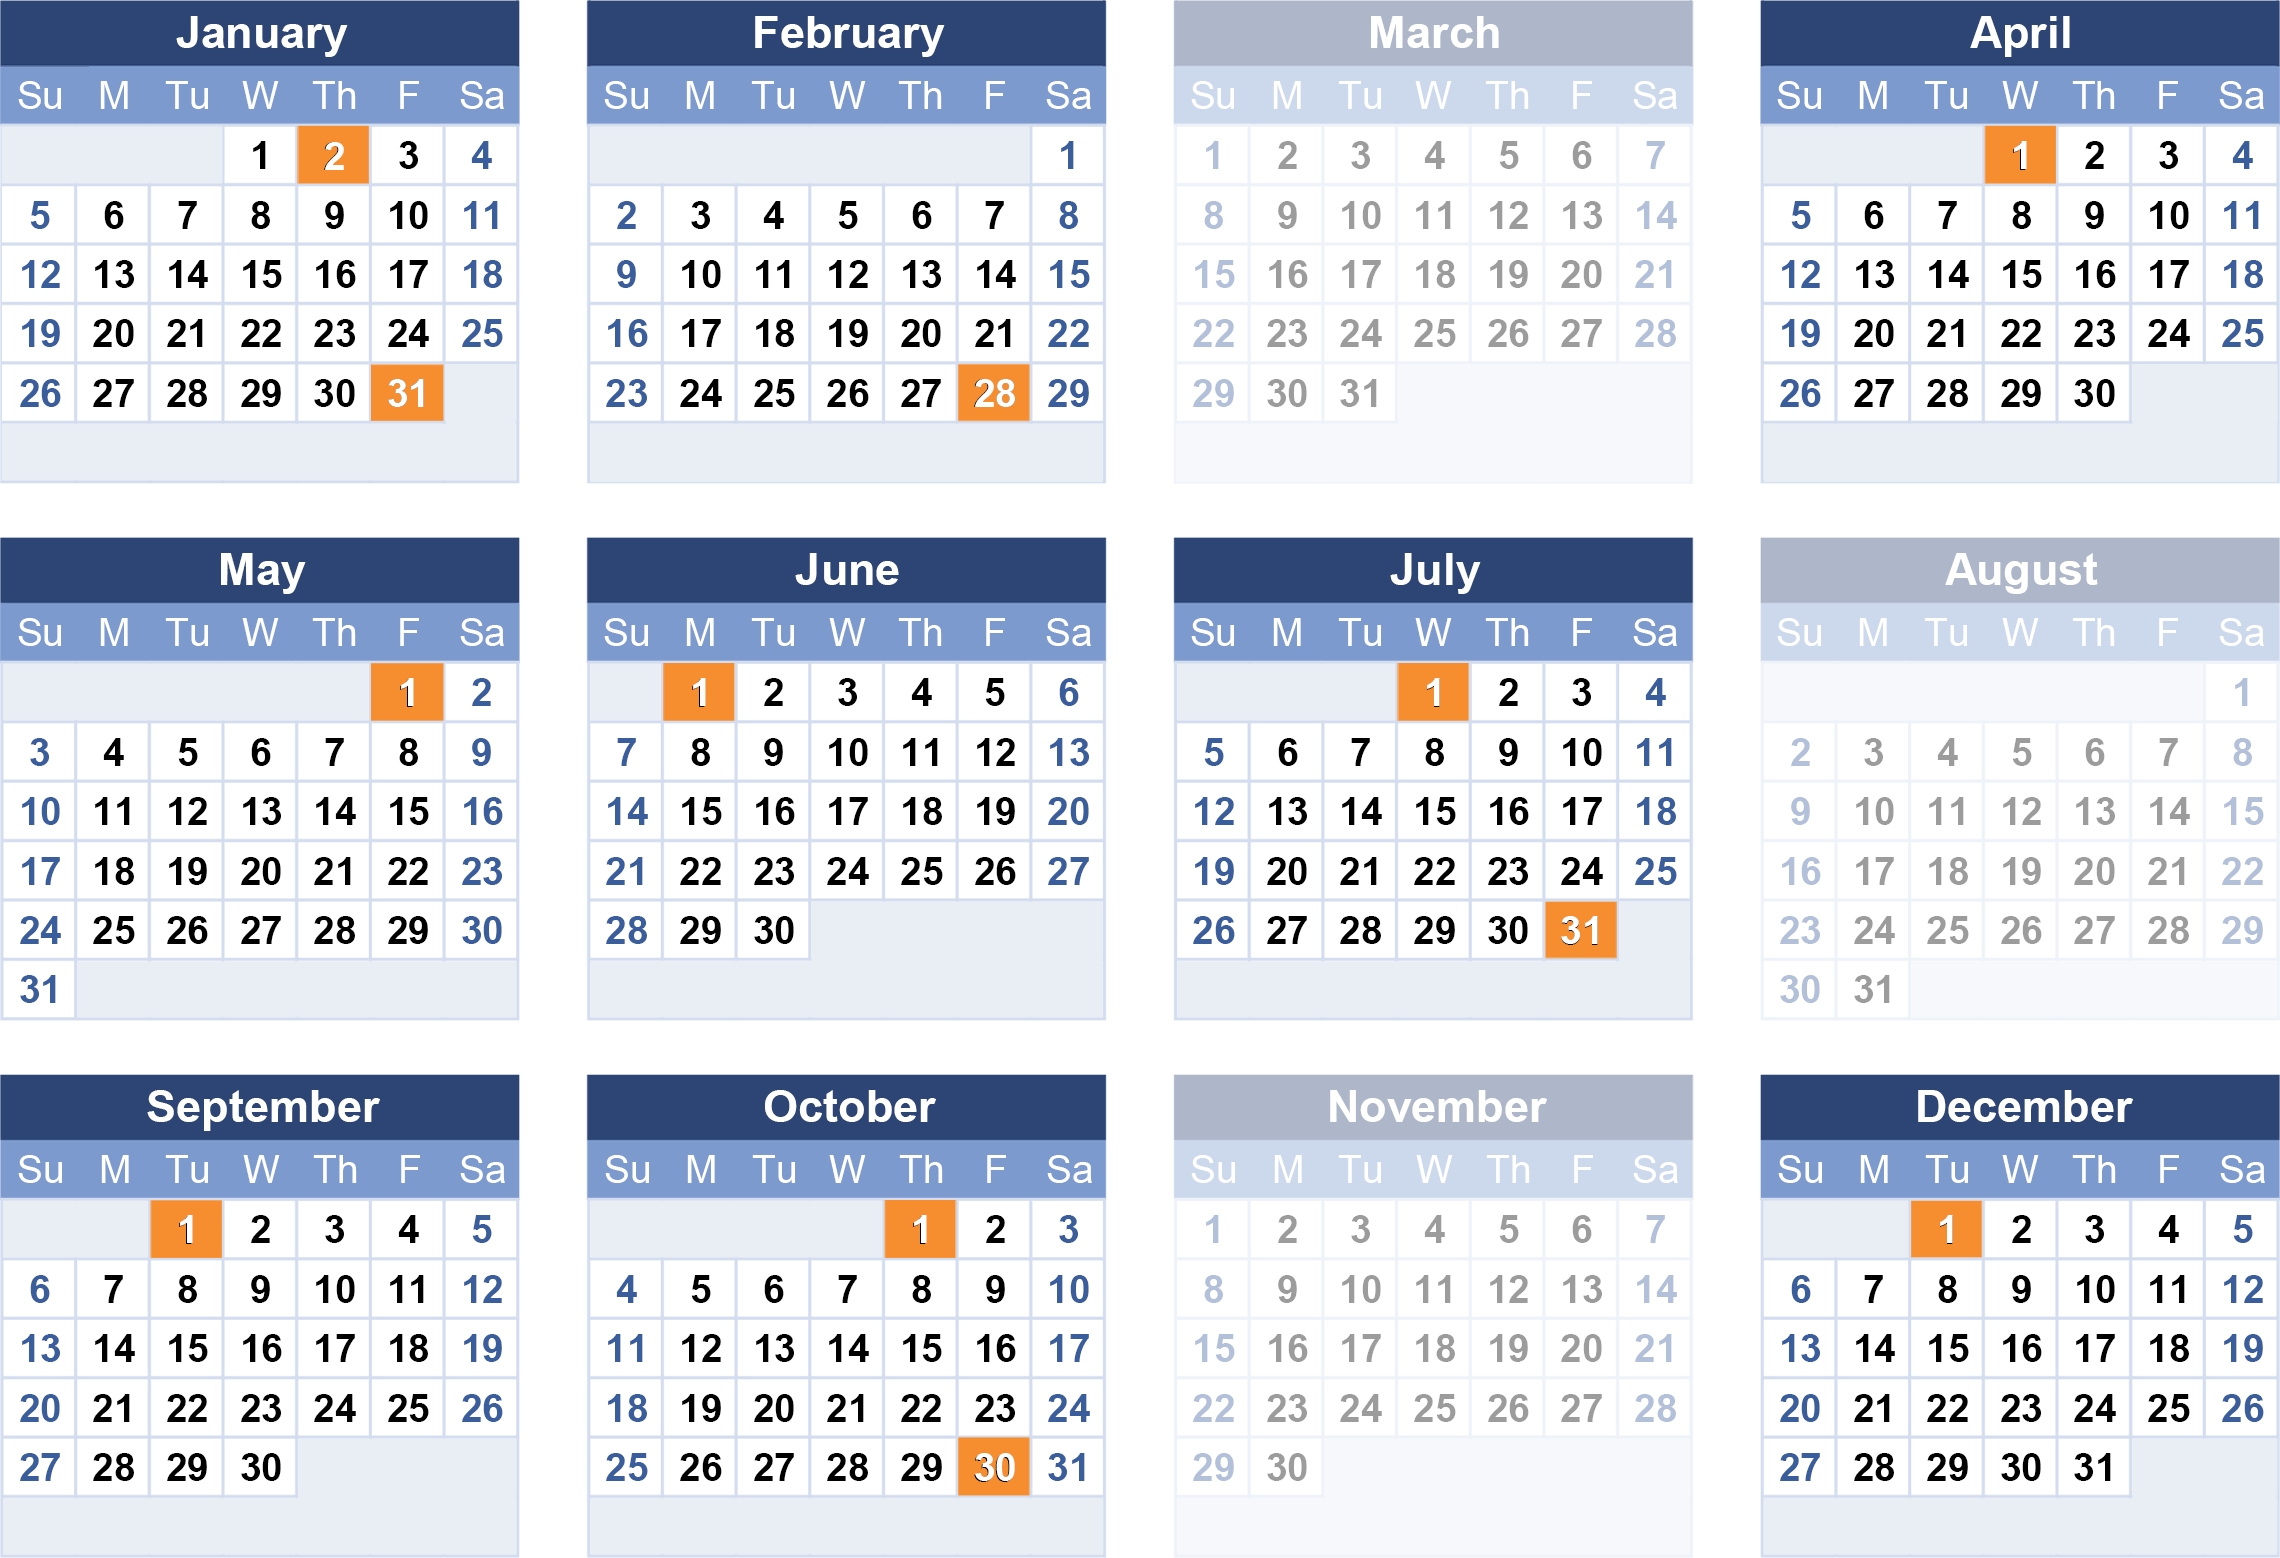 2020 Payroll And Holiday Schedule For State Of Mi Employees | Calendar